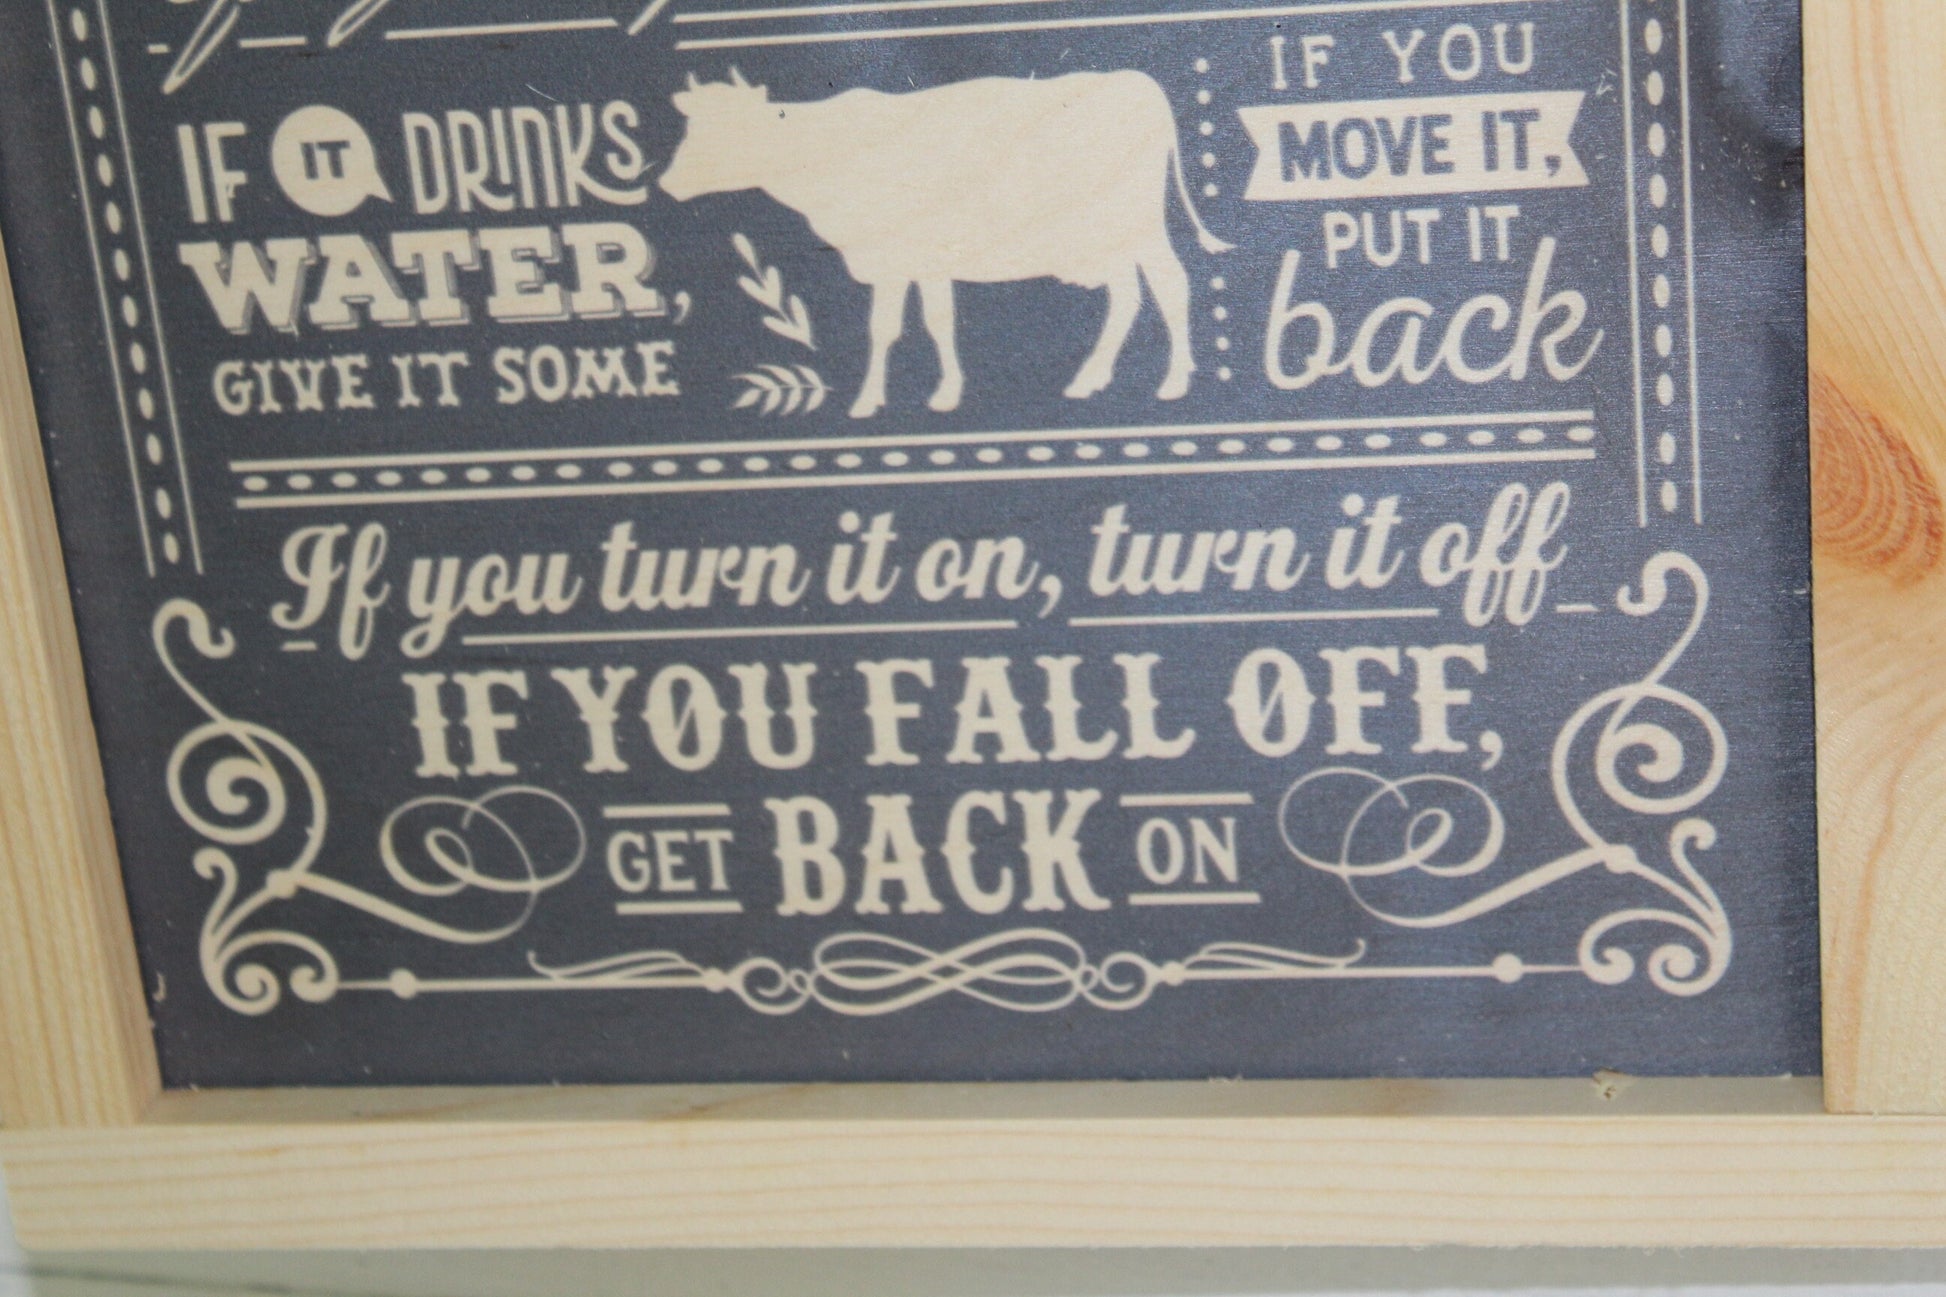 Barn Rules Wood Sign If You Ride It Feed It Rustic Wall Hanging Fall Off Get Back On Cow Farm Life Decoration Hard Work Gift Farmer Western